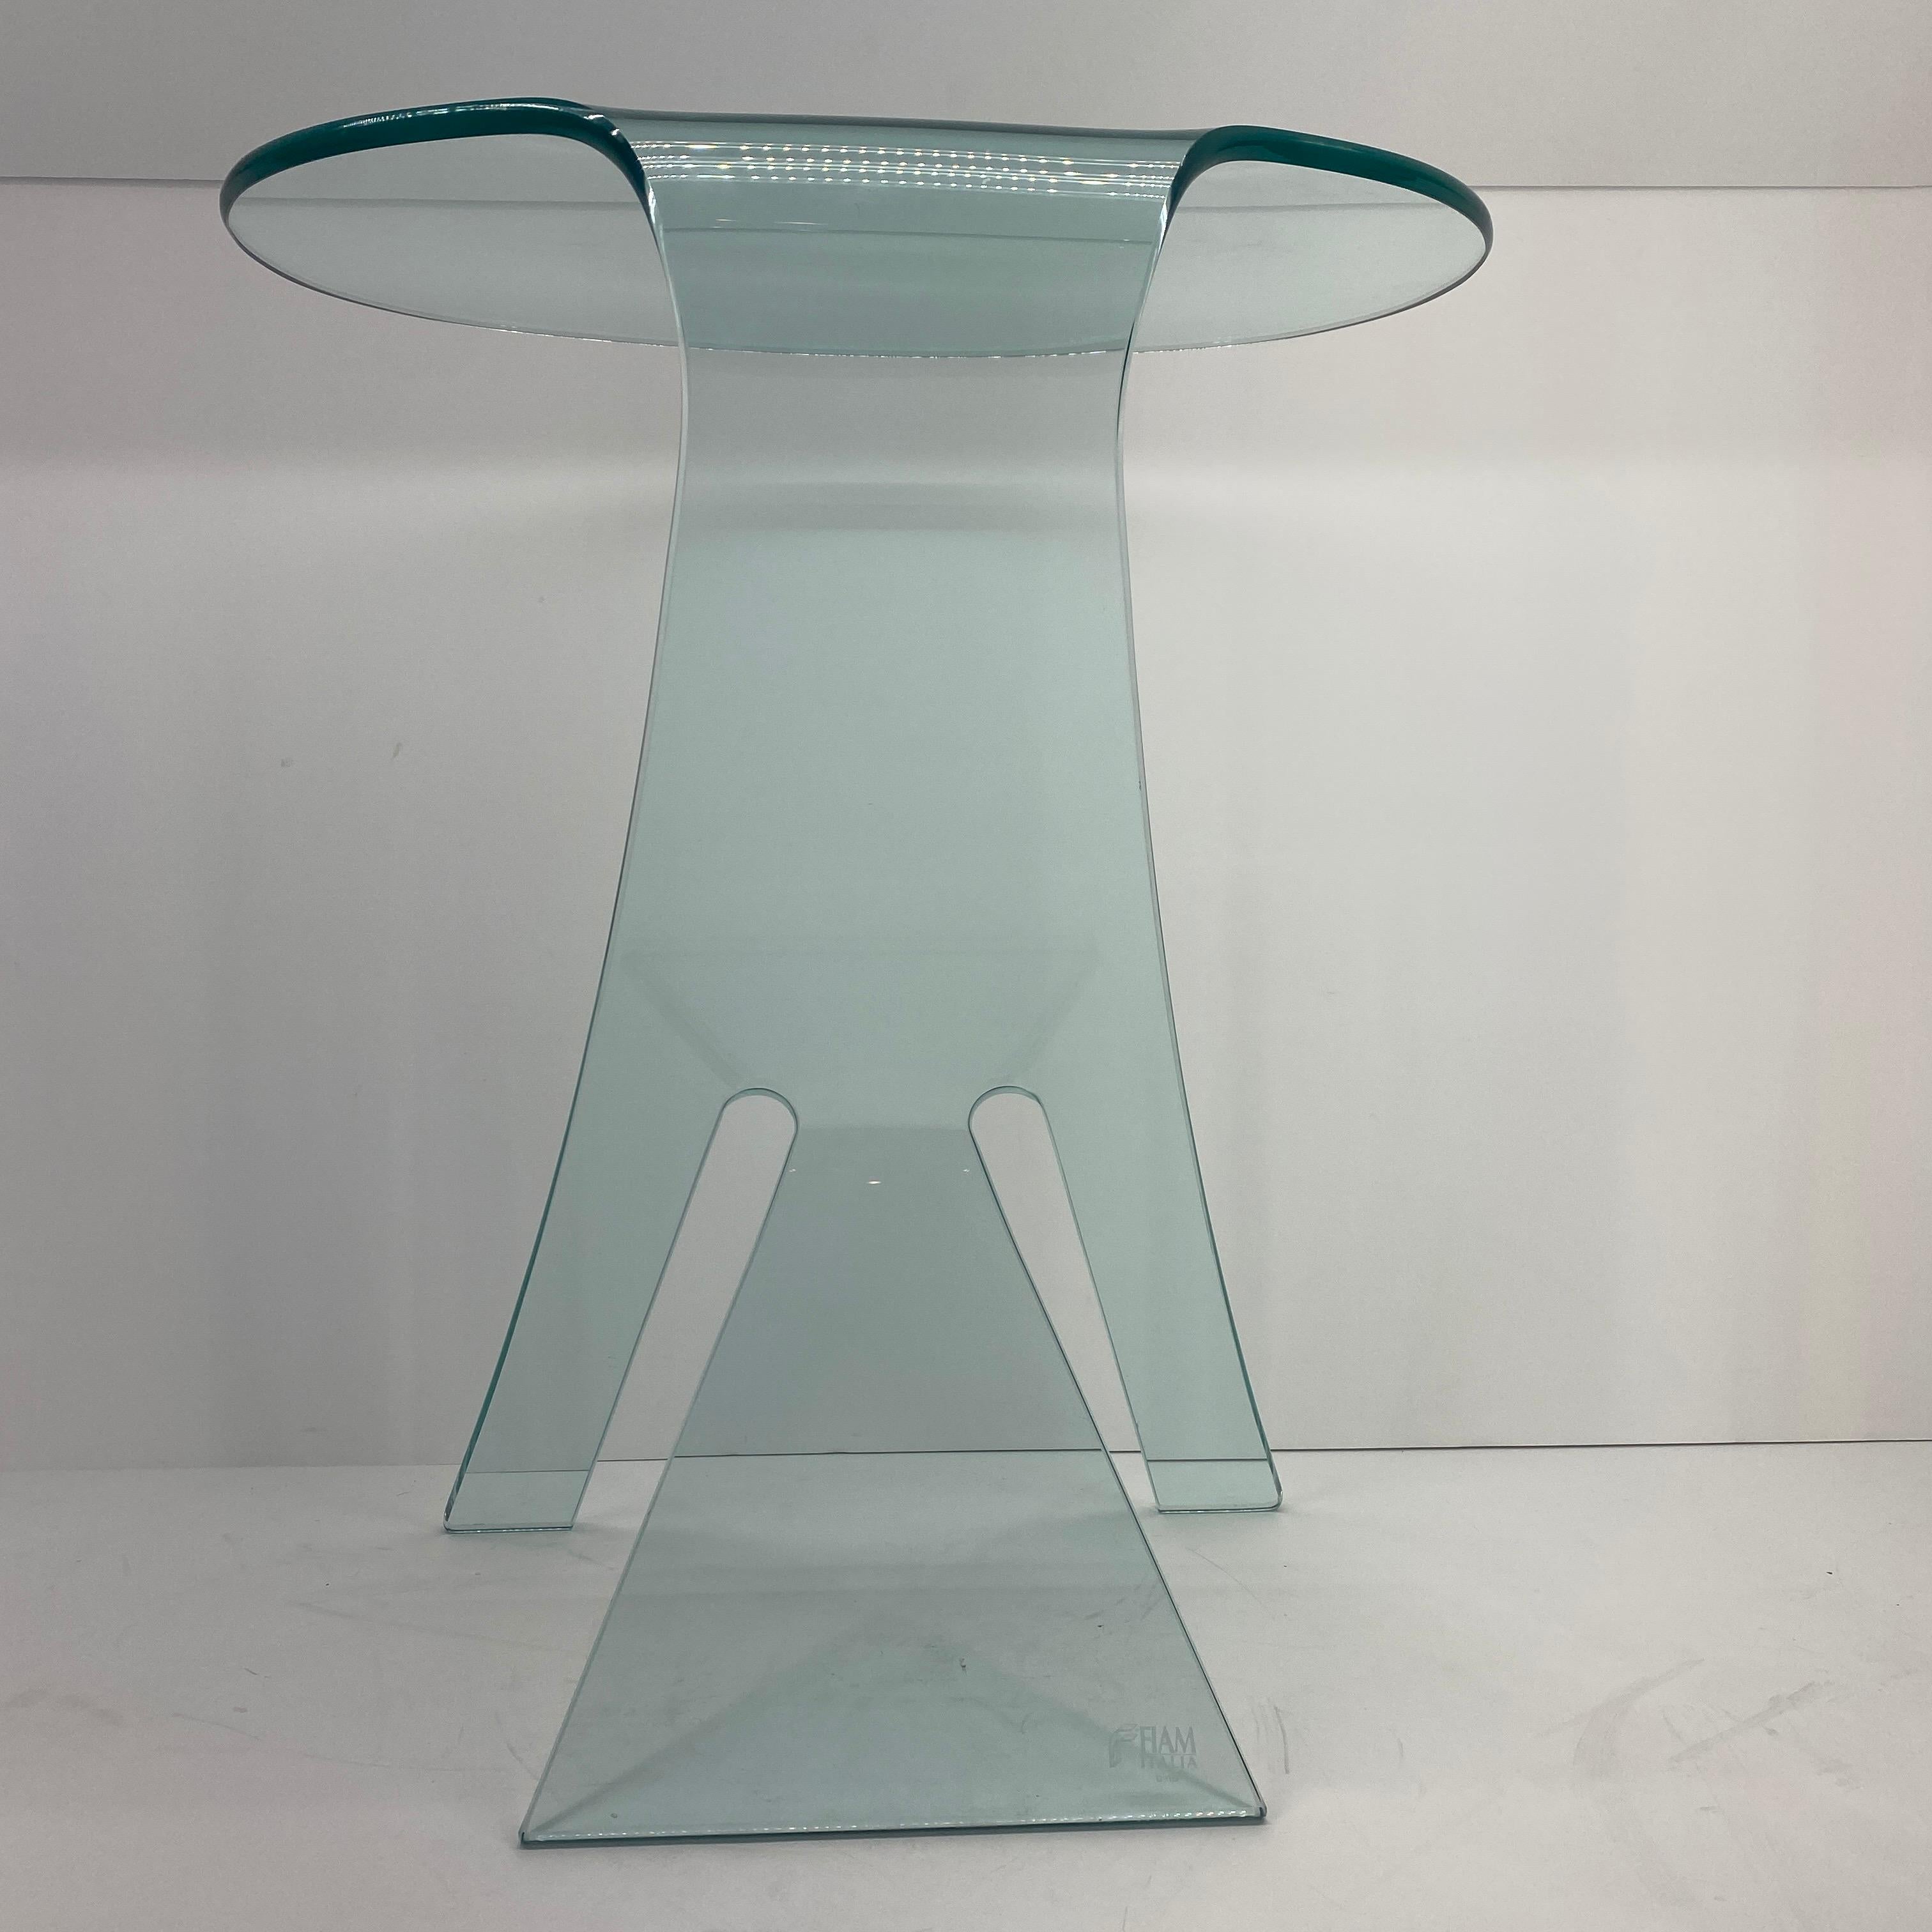 Modern Side Table Designed by Vittorio Livi For FIAM Italy 2